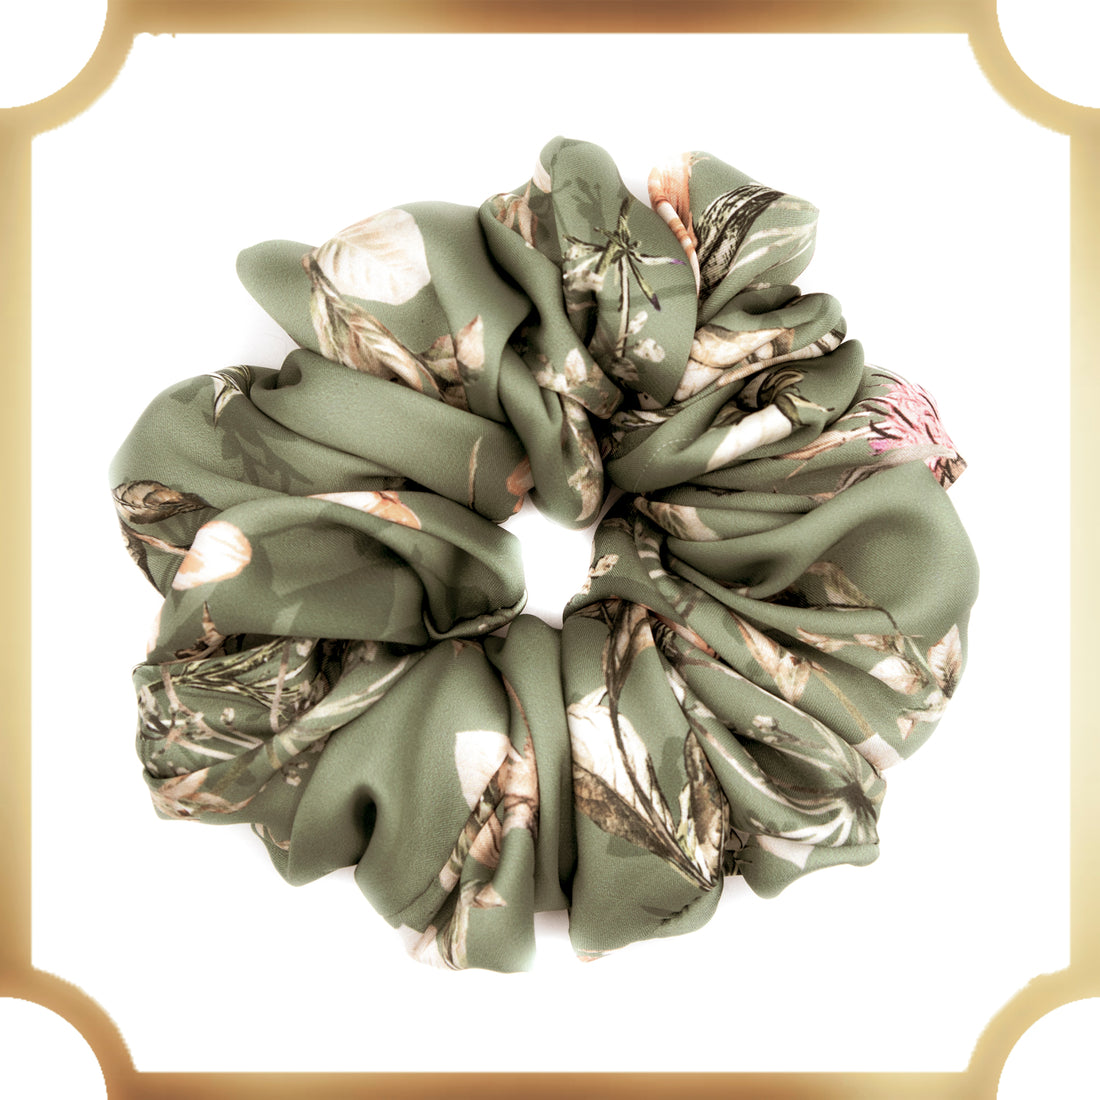  dreams scrunchie collection a pleasant thought